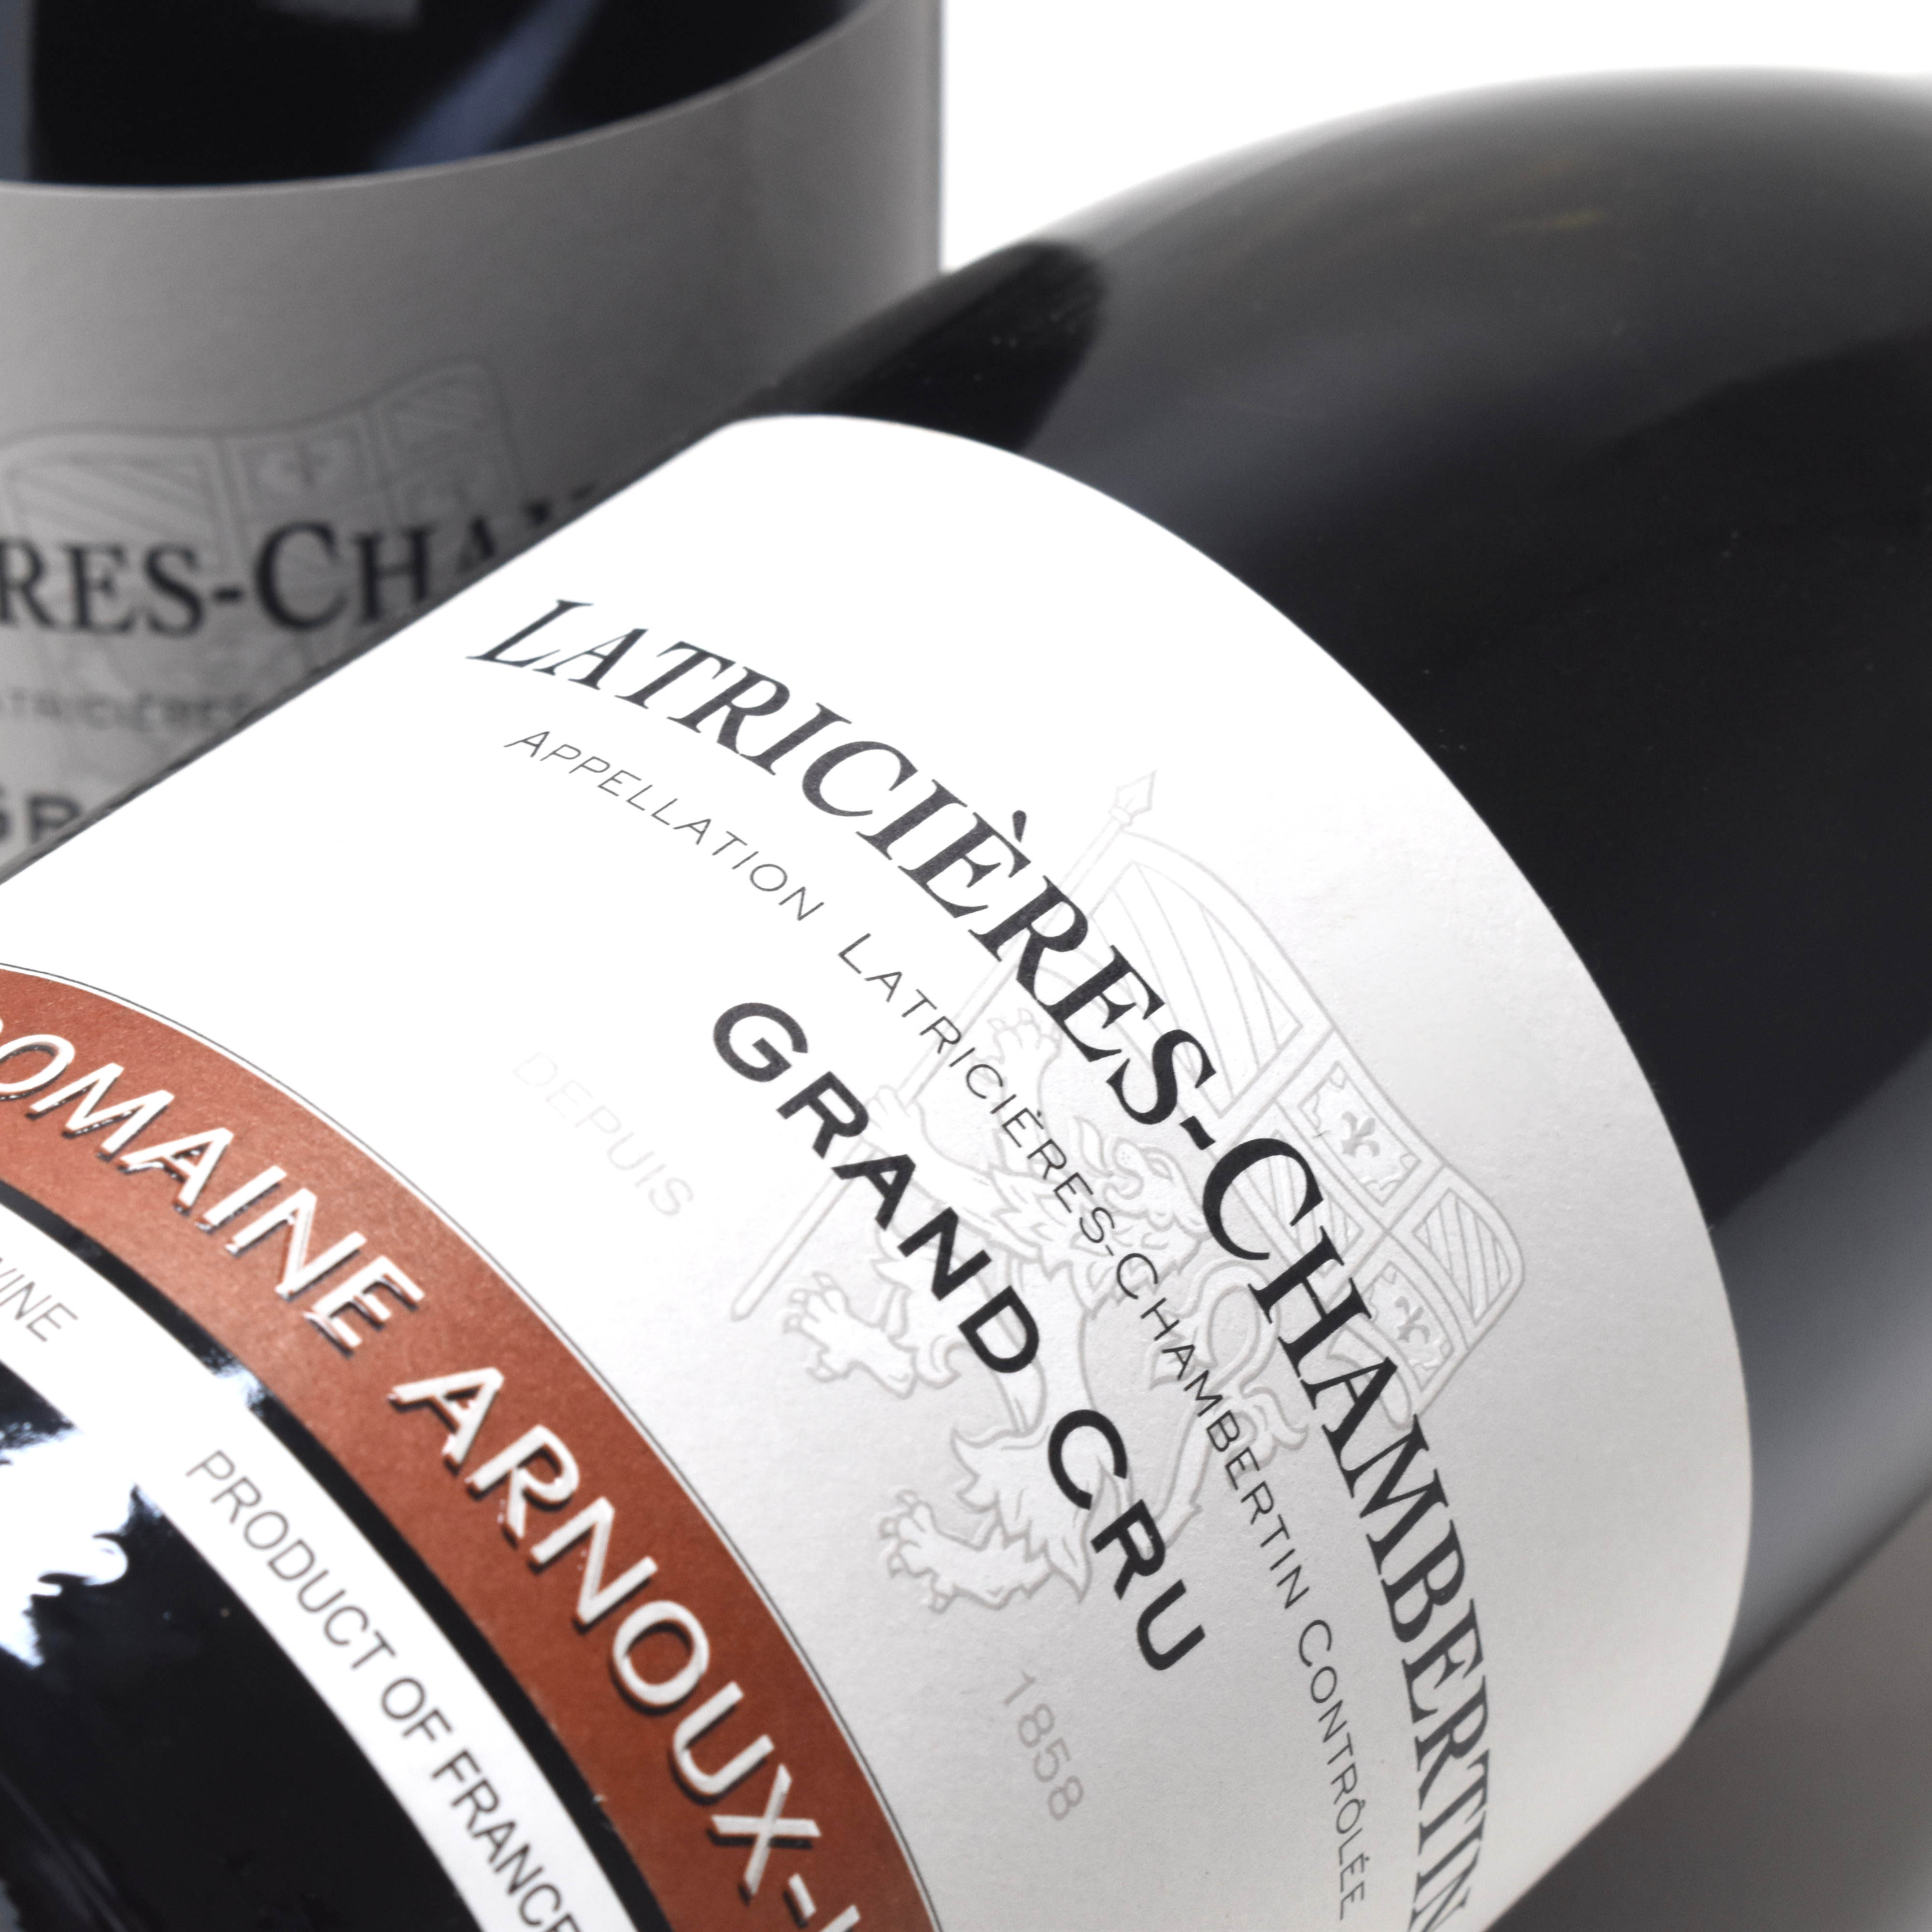 View All Wines from Arnoux (Lachaux)